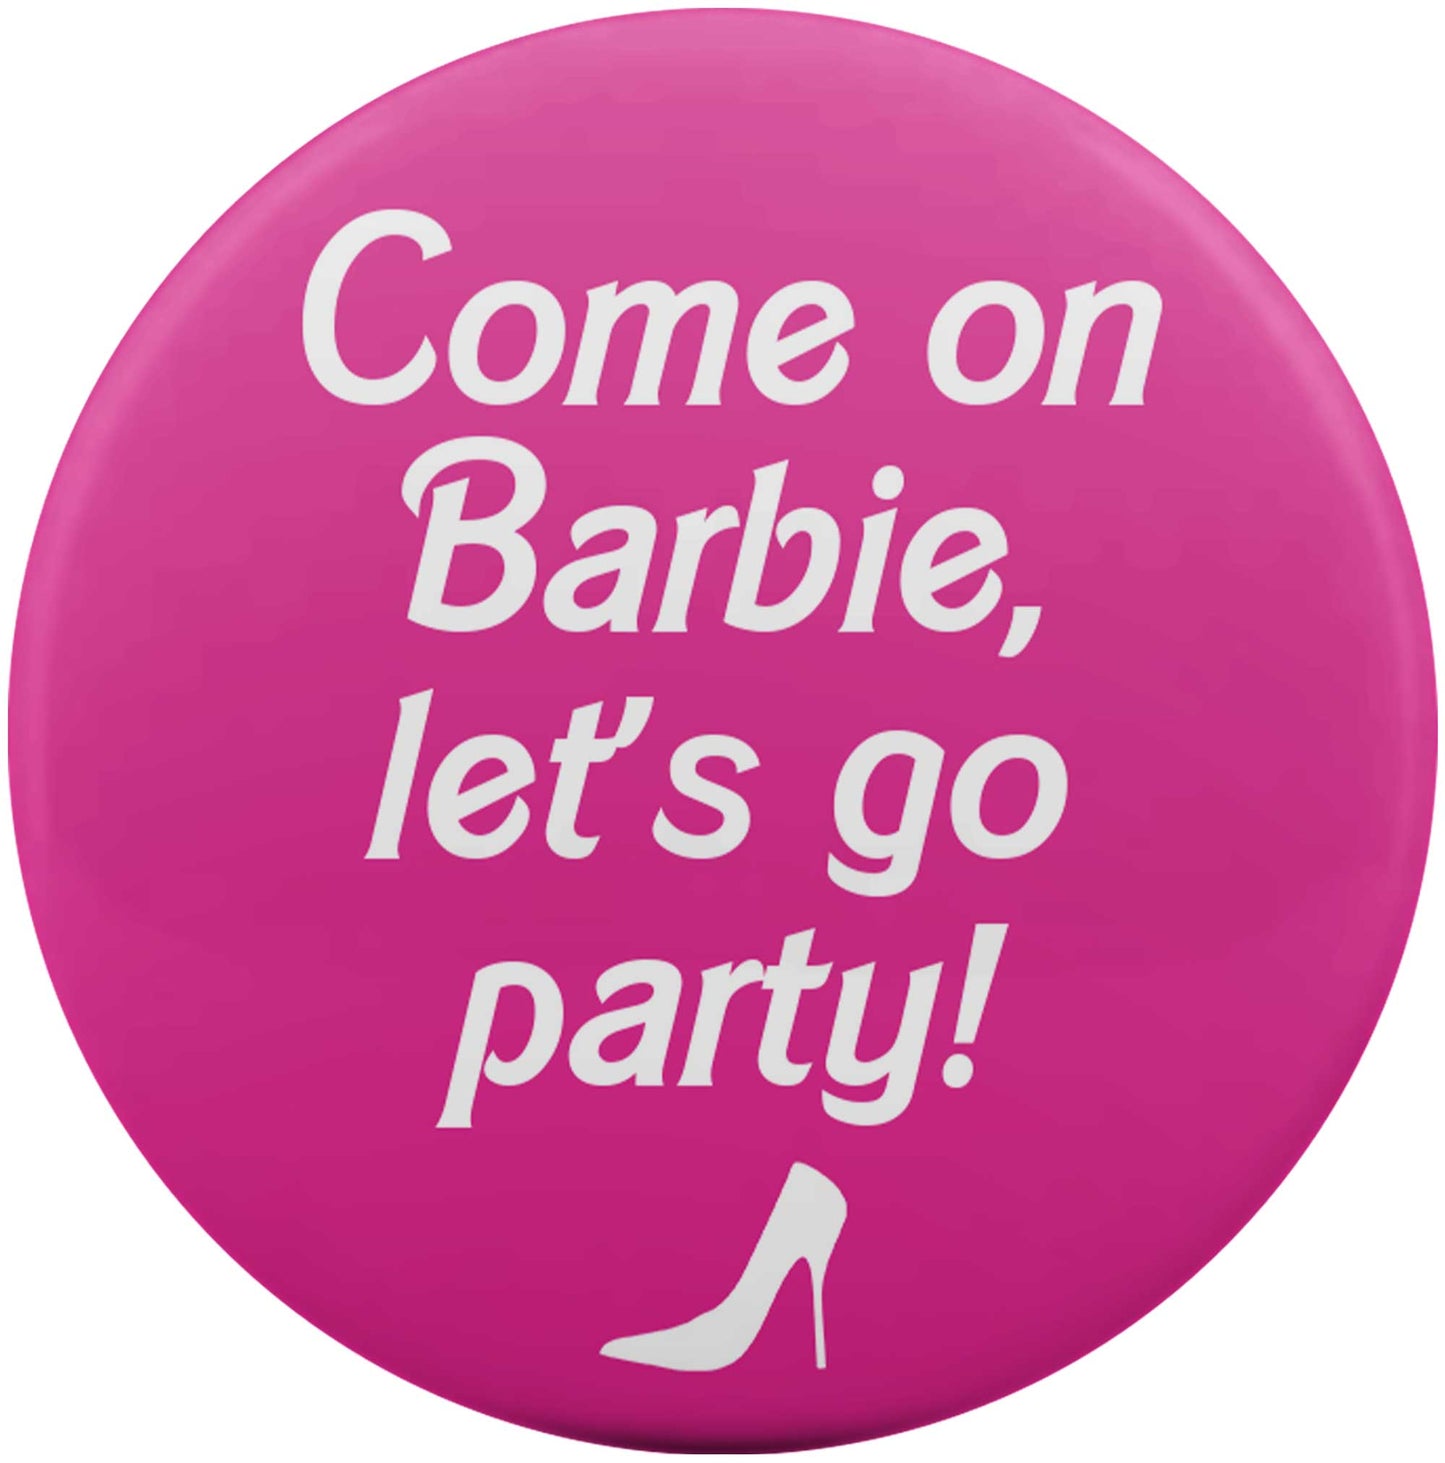 Come on Barbie, Let's Go Party!